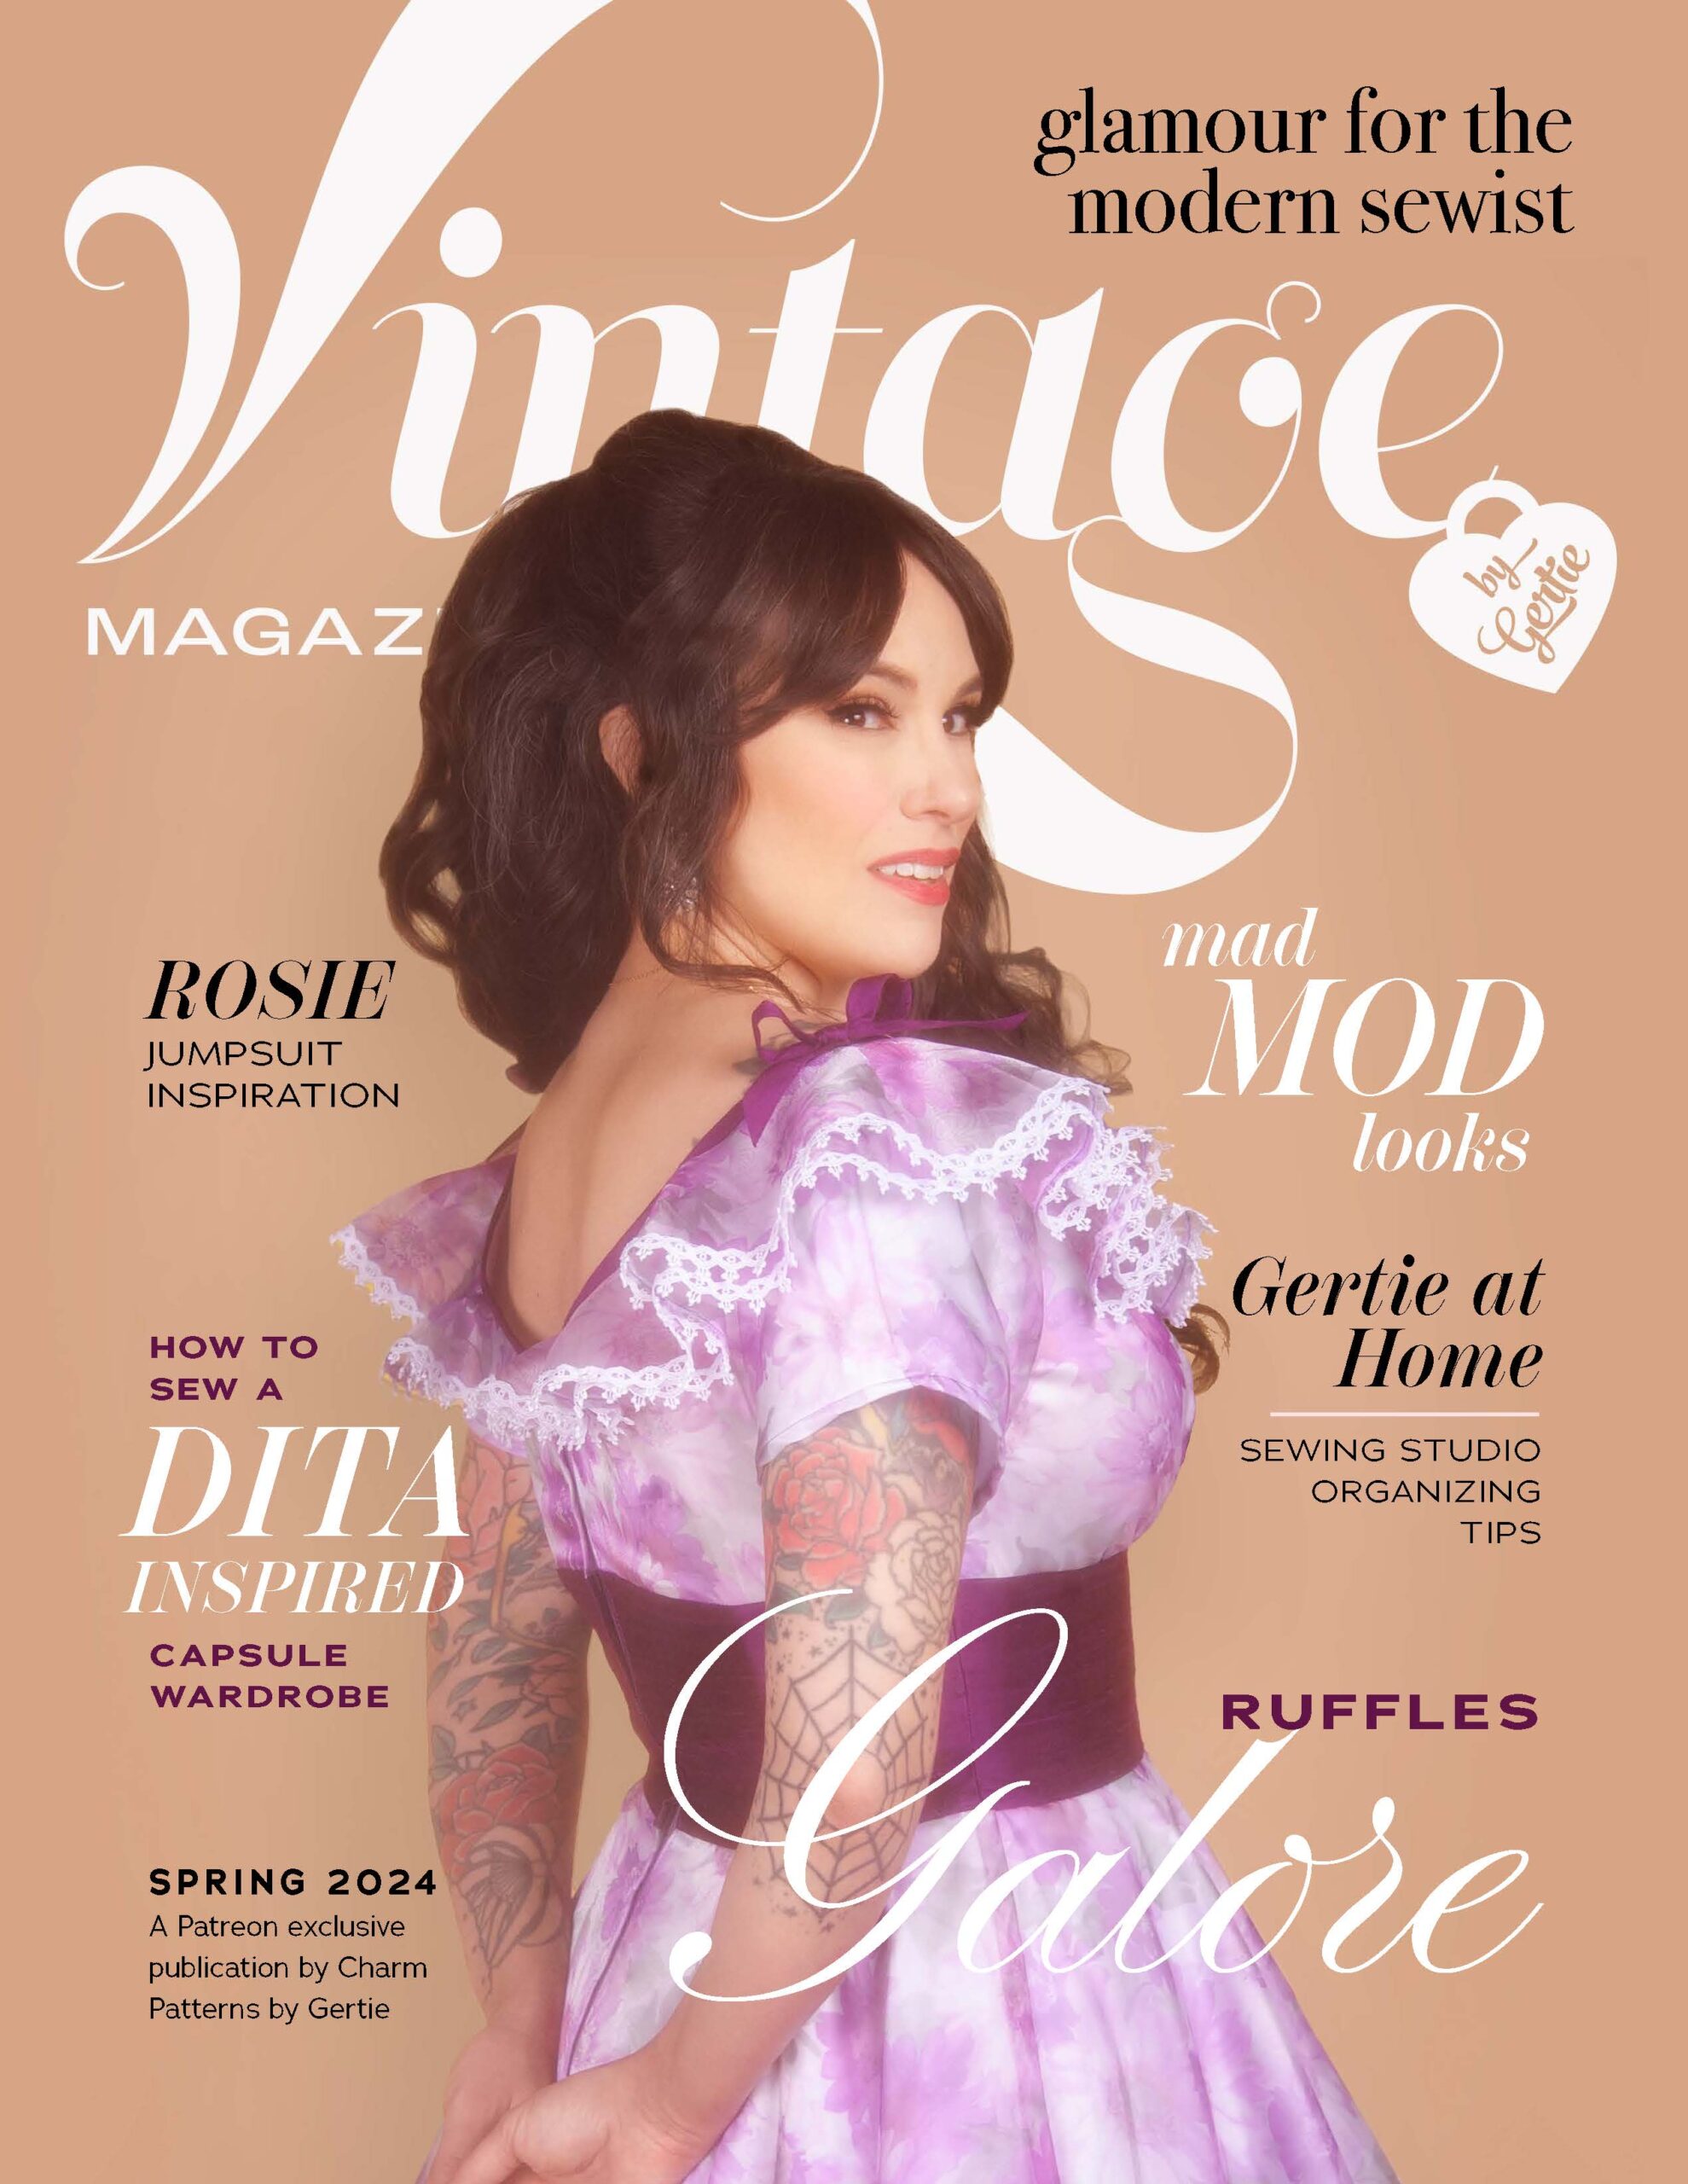 Vintage by Gertie Magazine issue 5 from Spring 2024.